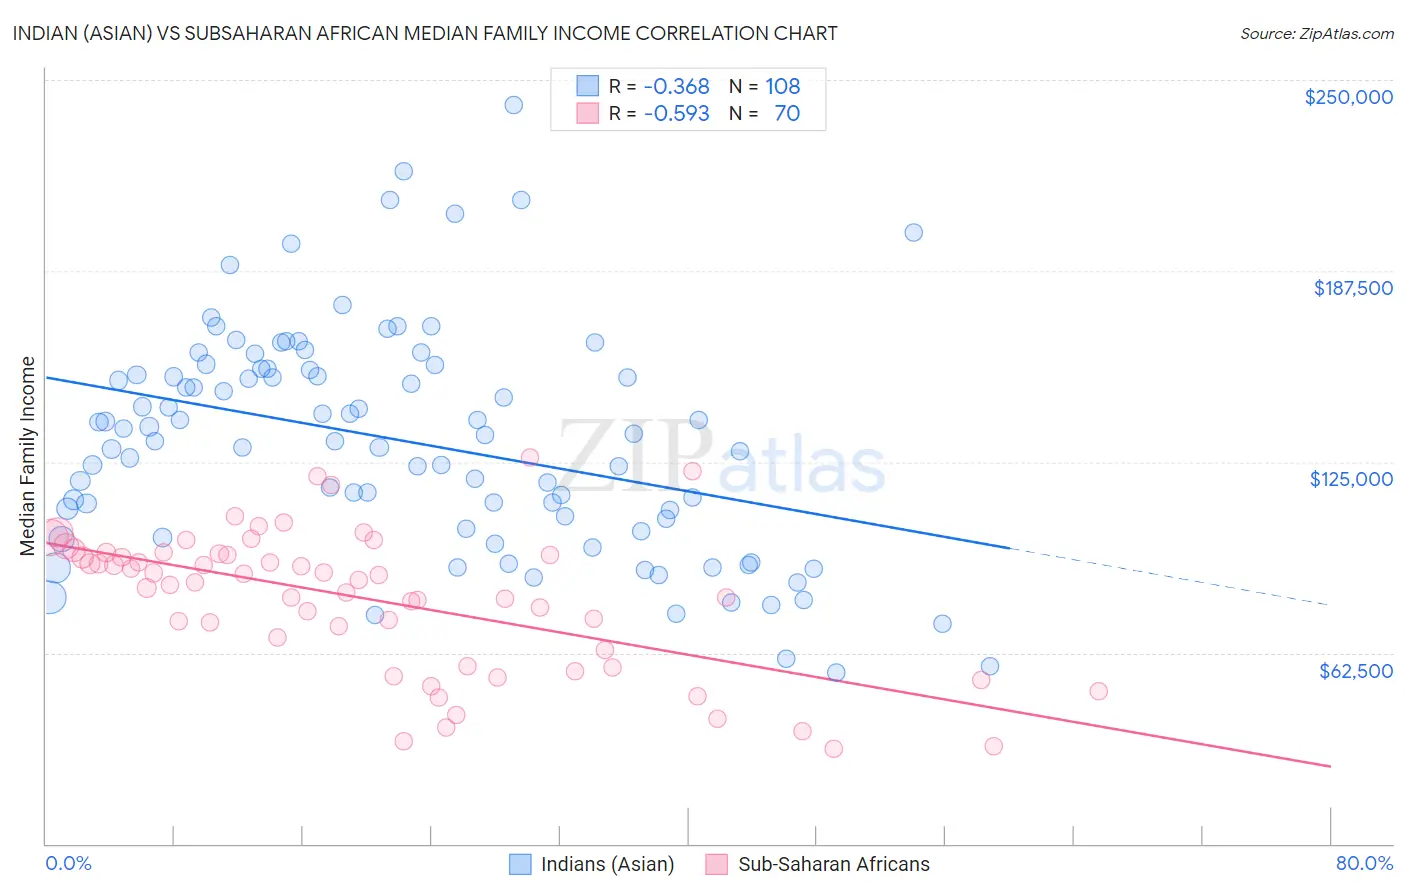 Indian (Asian) vs Subsaharan African Median Family Income